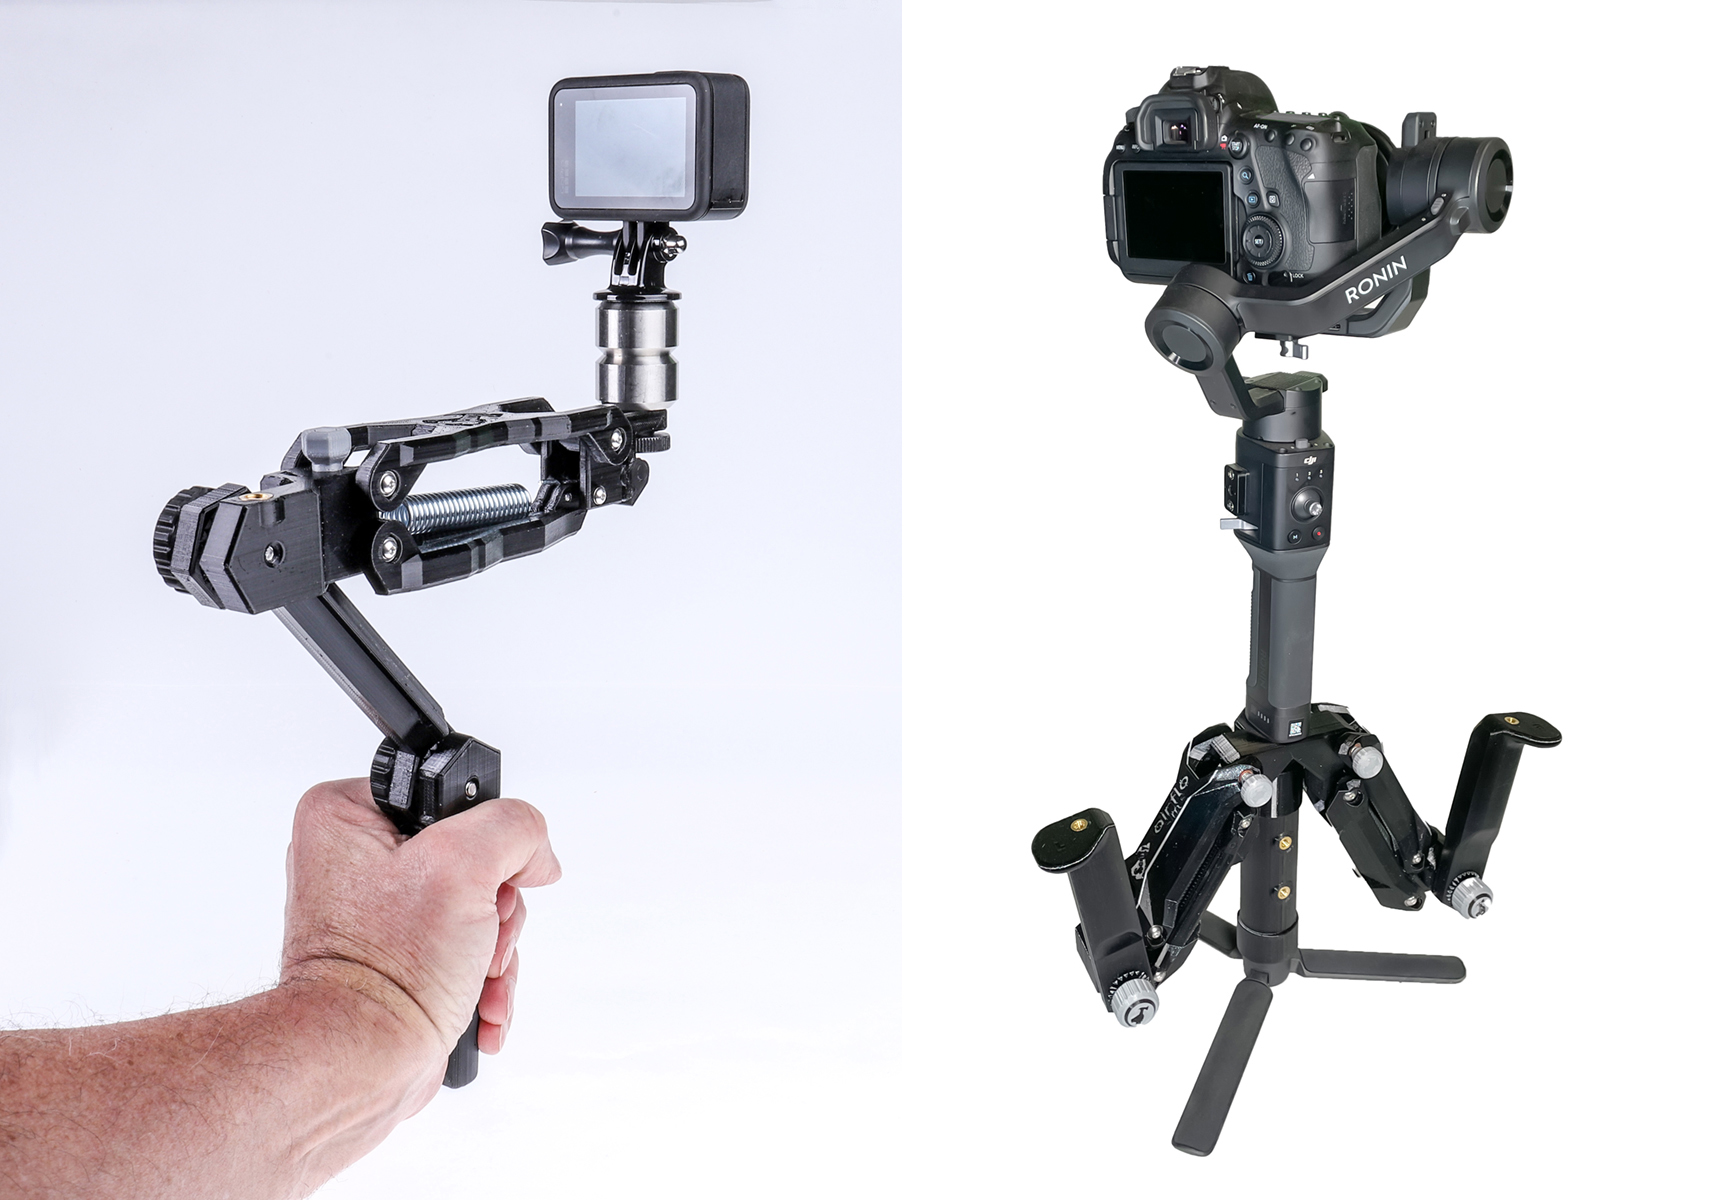 Scotty Makes Stuff Z-axis Stabilizers Hands-On